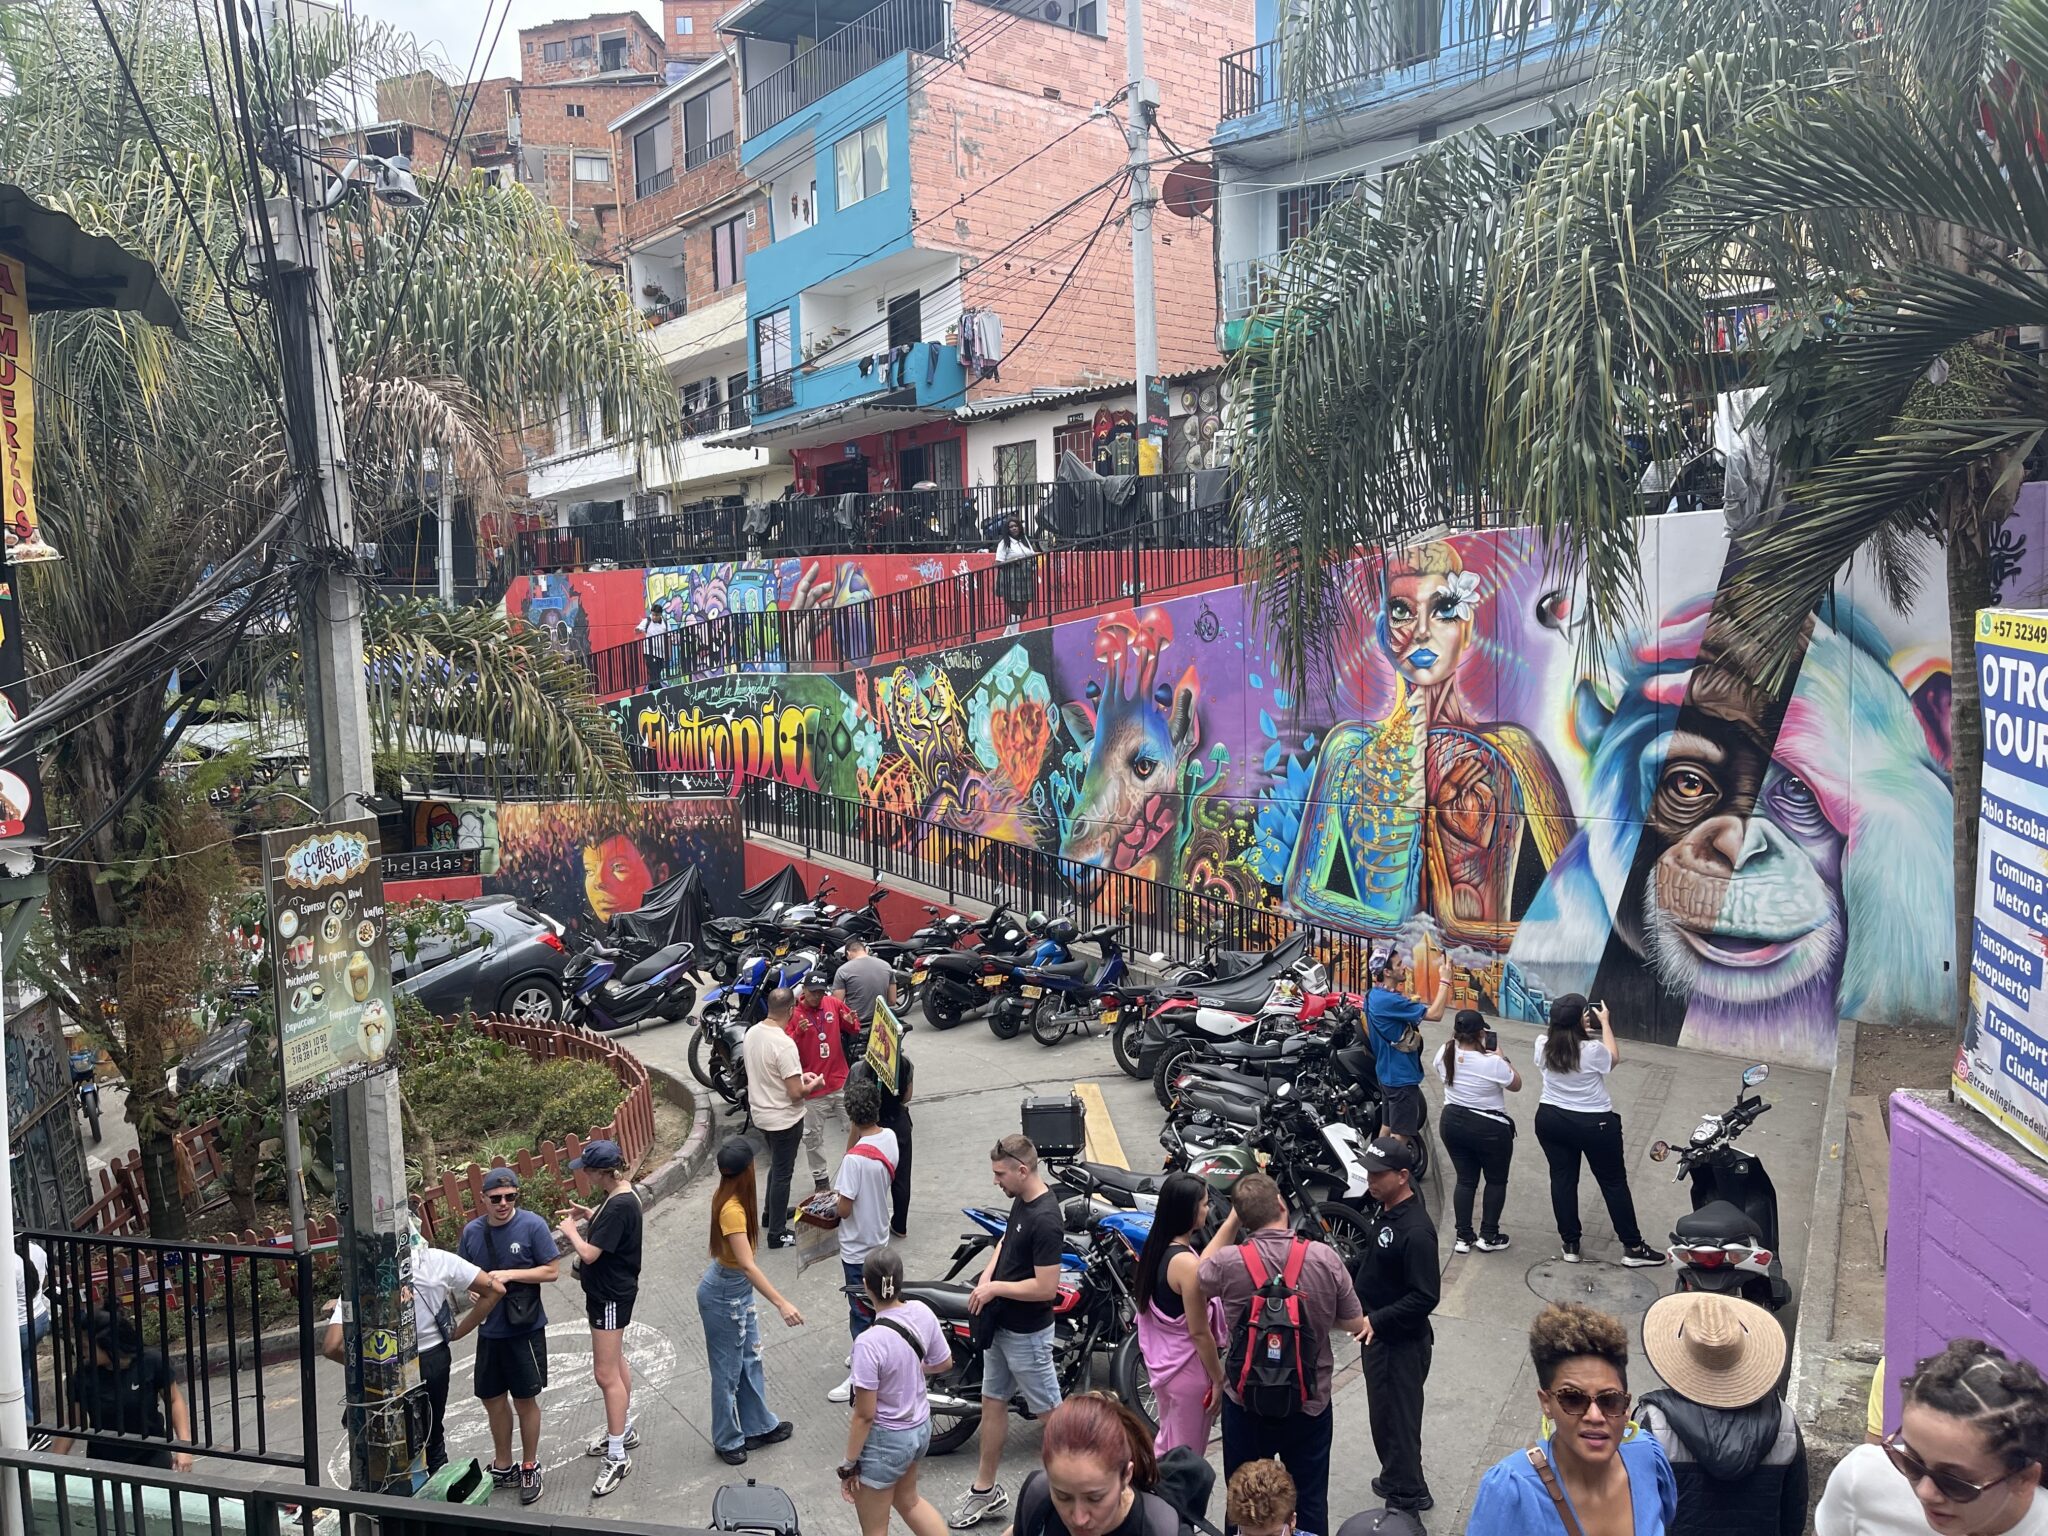 Tourists and locals checked out the popular Comuna 13 in Medellin, Colombia on February 9, 2023. Source: Dennis Schaal/Skift